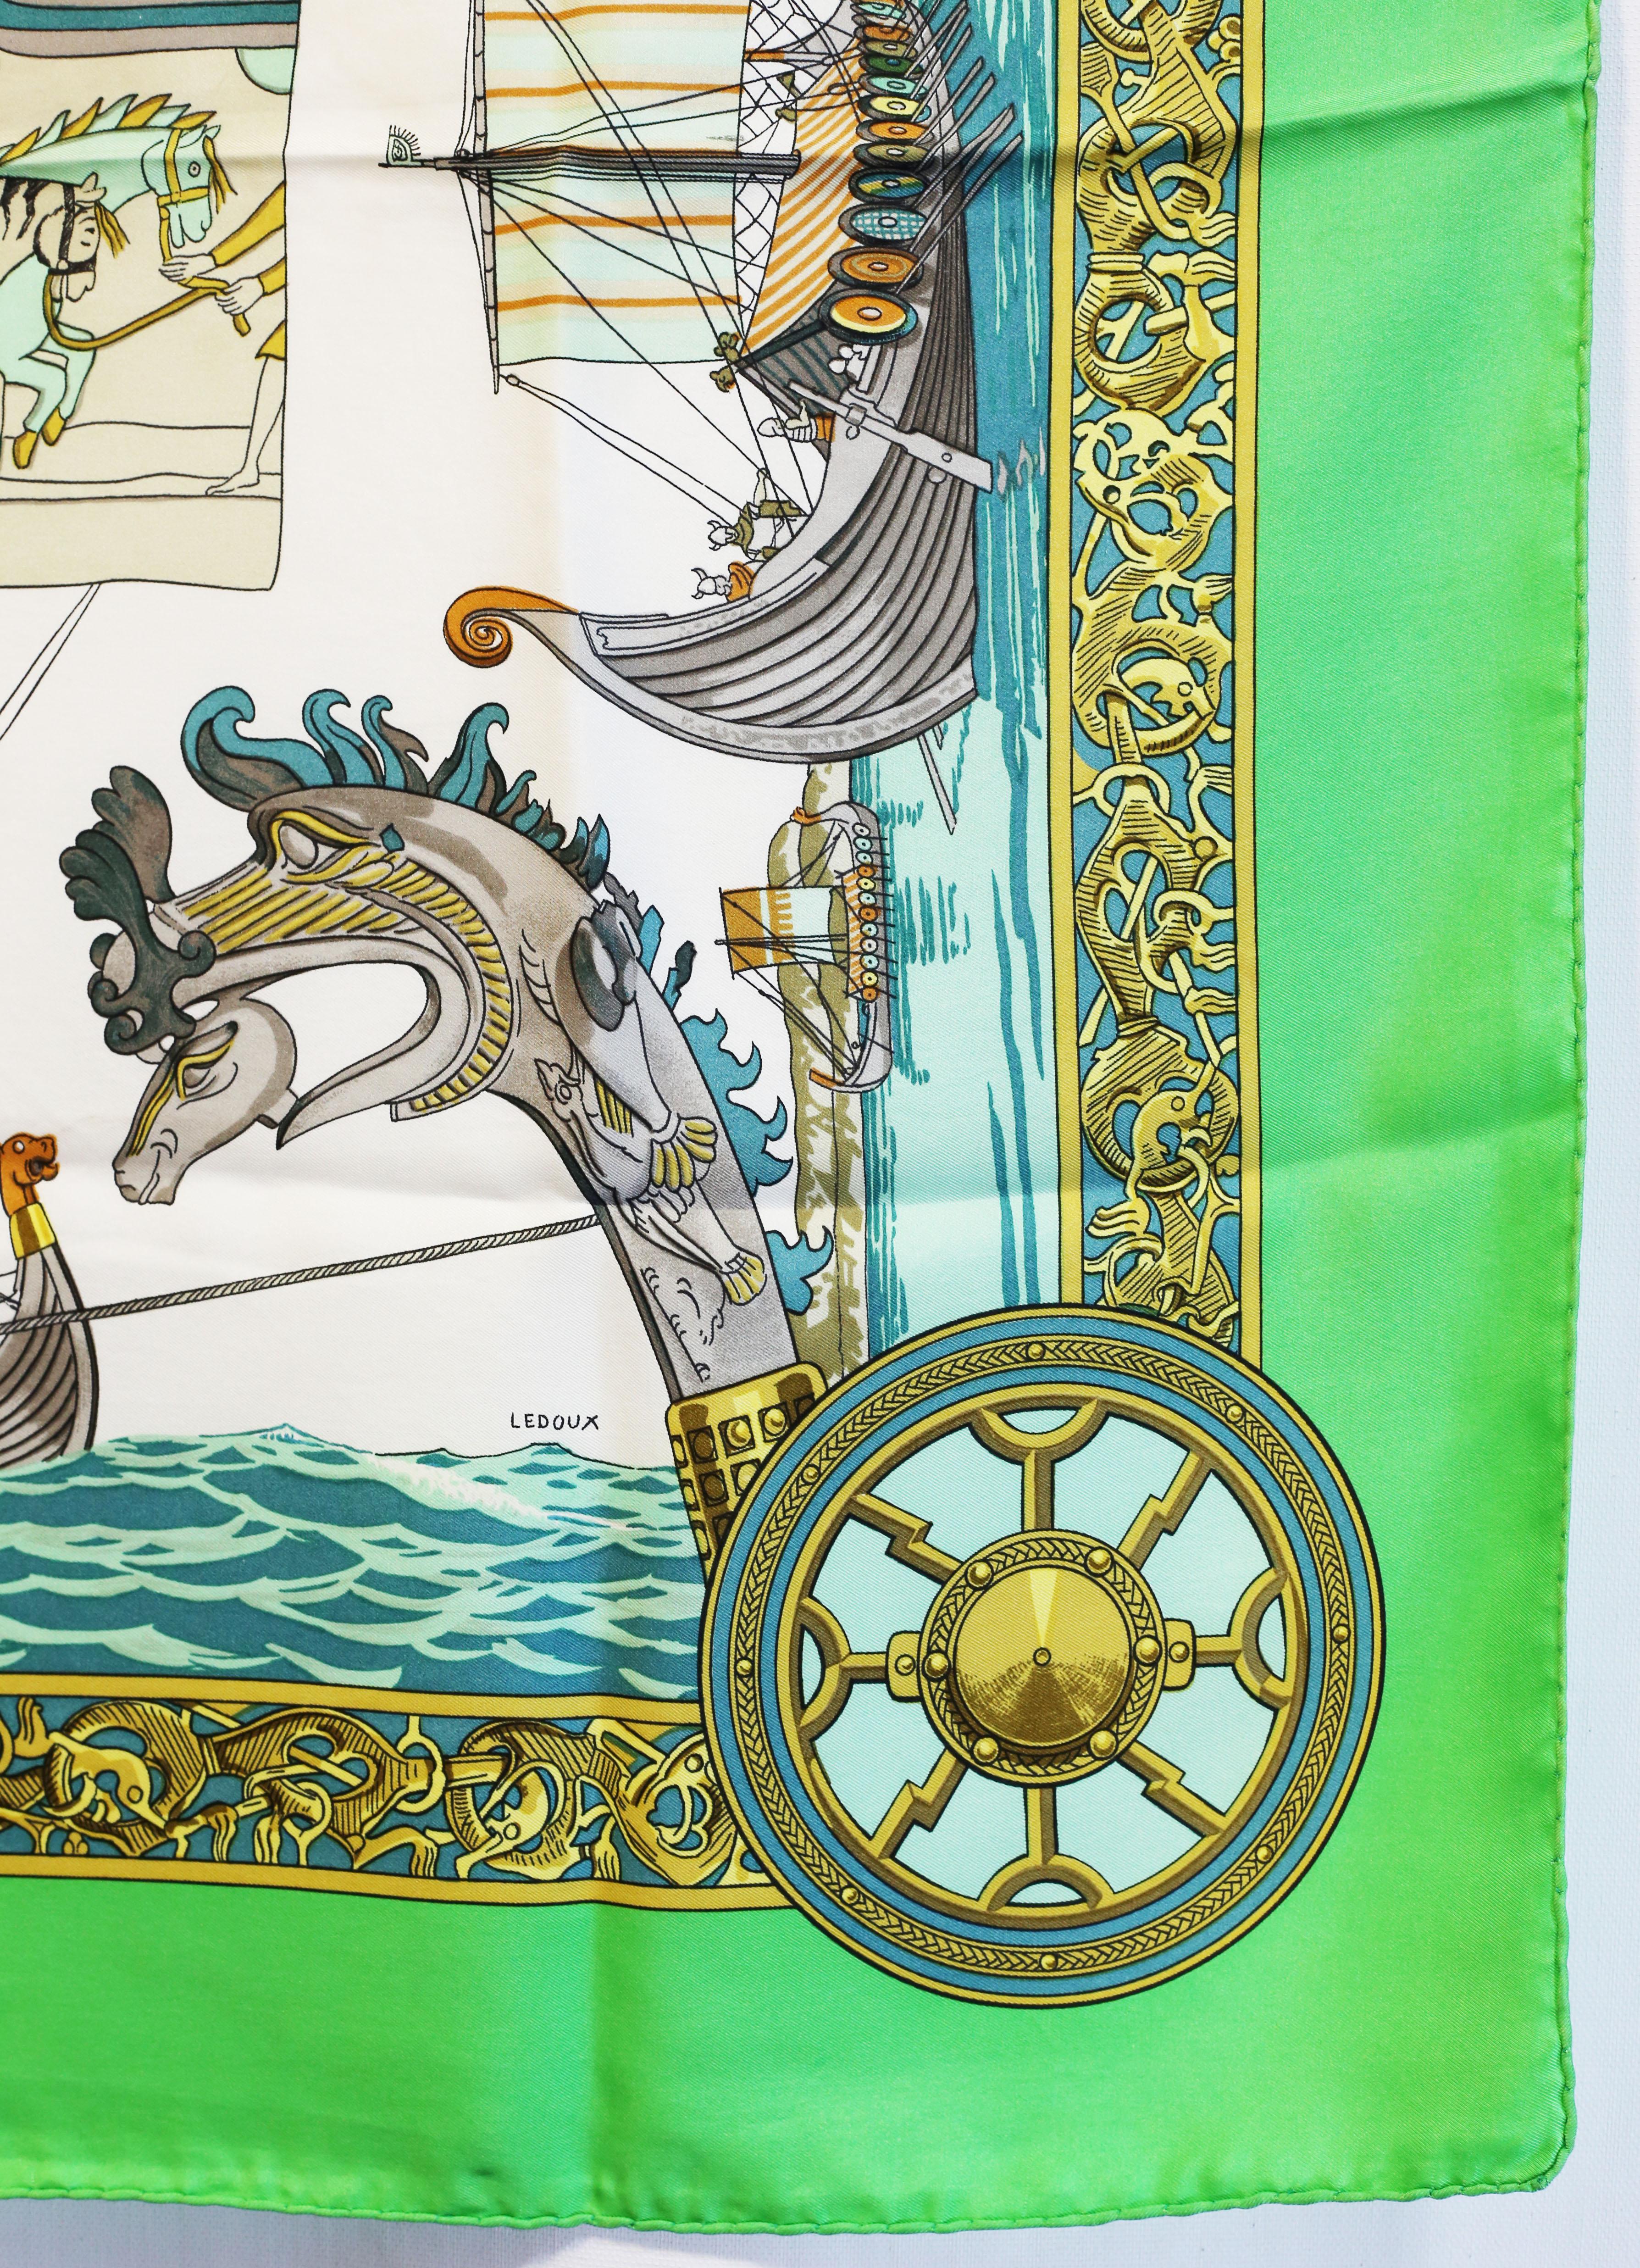 HERMES Scarf  Silk Scarf 100%  Paris, Made In France Les Normands is especially lovely in this teal, greem on white colorway.
Perfect summer accessory!
Read about Philippe Ledoux, the famous illustrator and Hermes designer.
Many of Ledoux’s